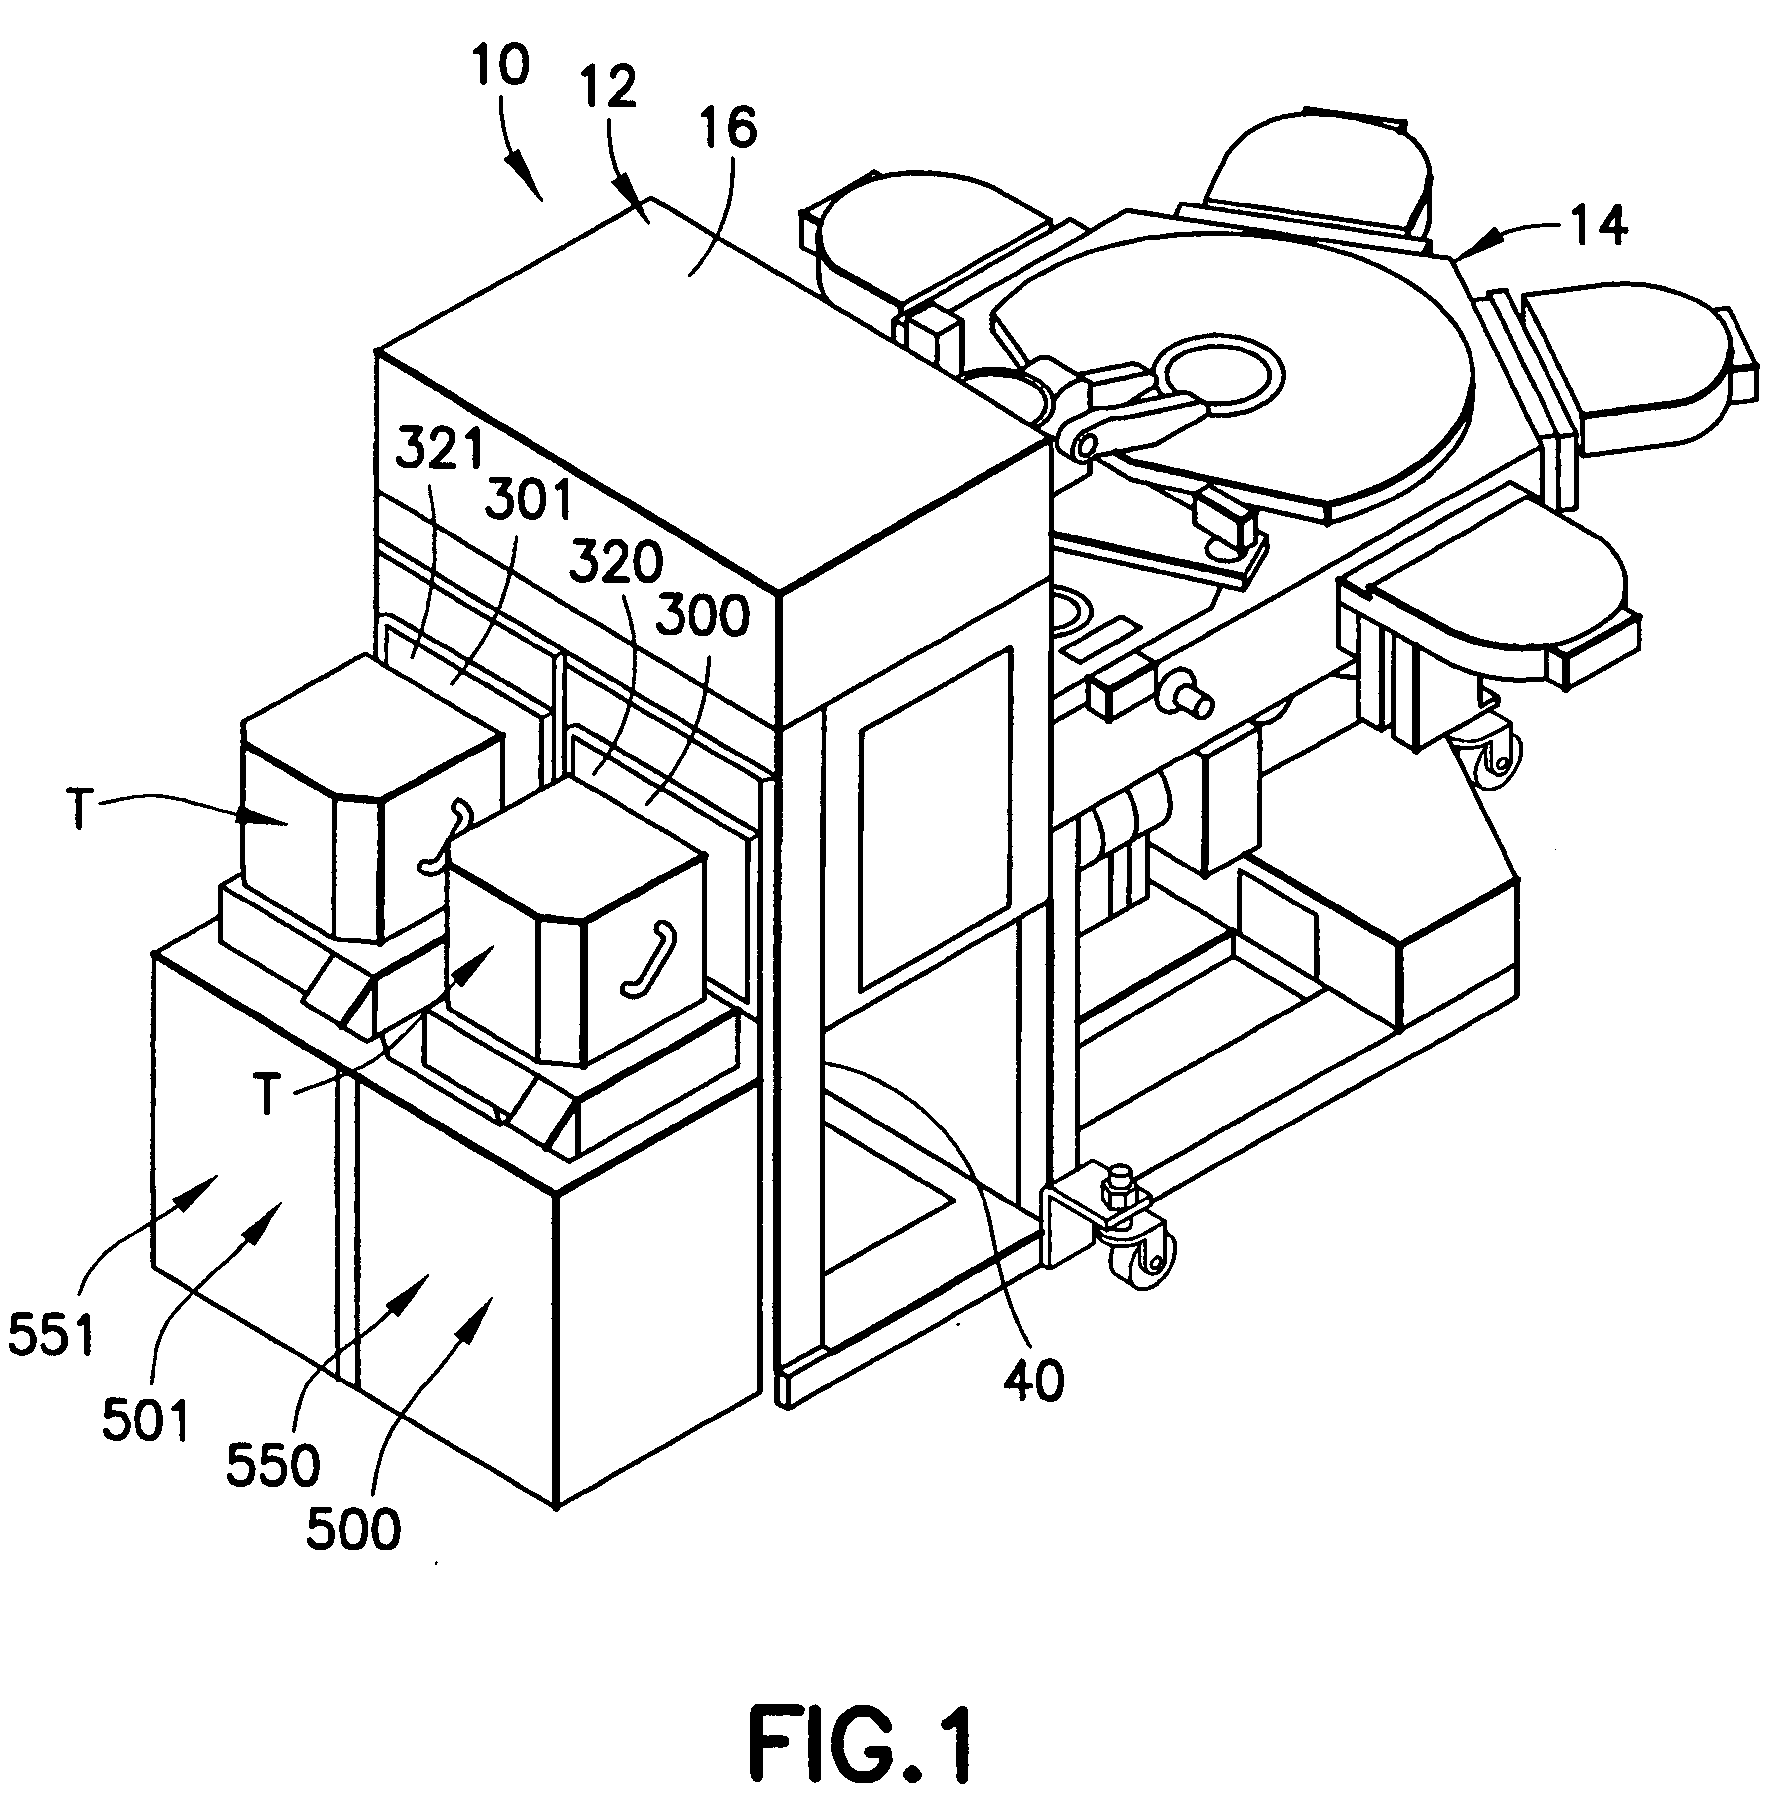 Equipment storage for substrate processing apparatus